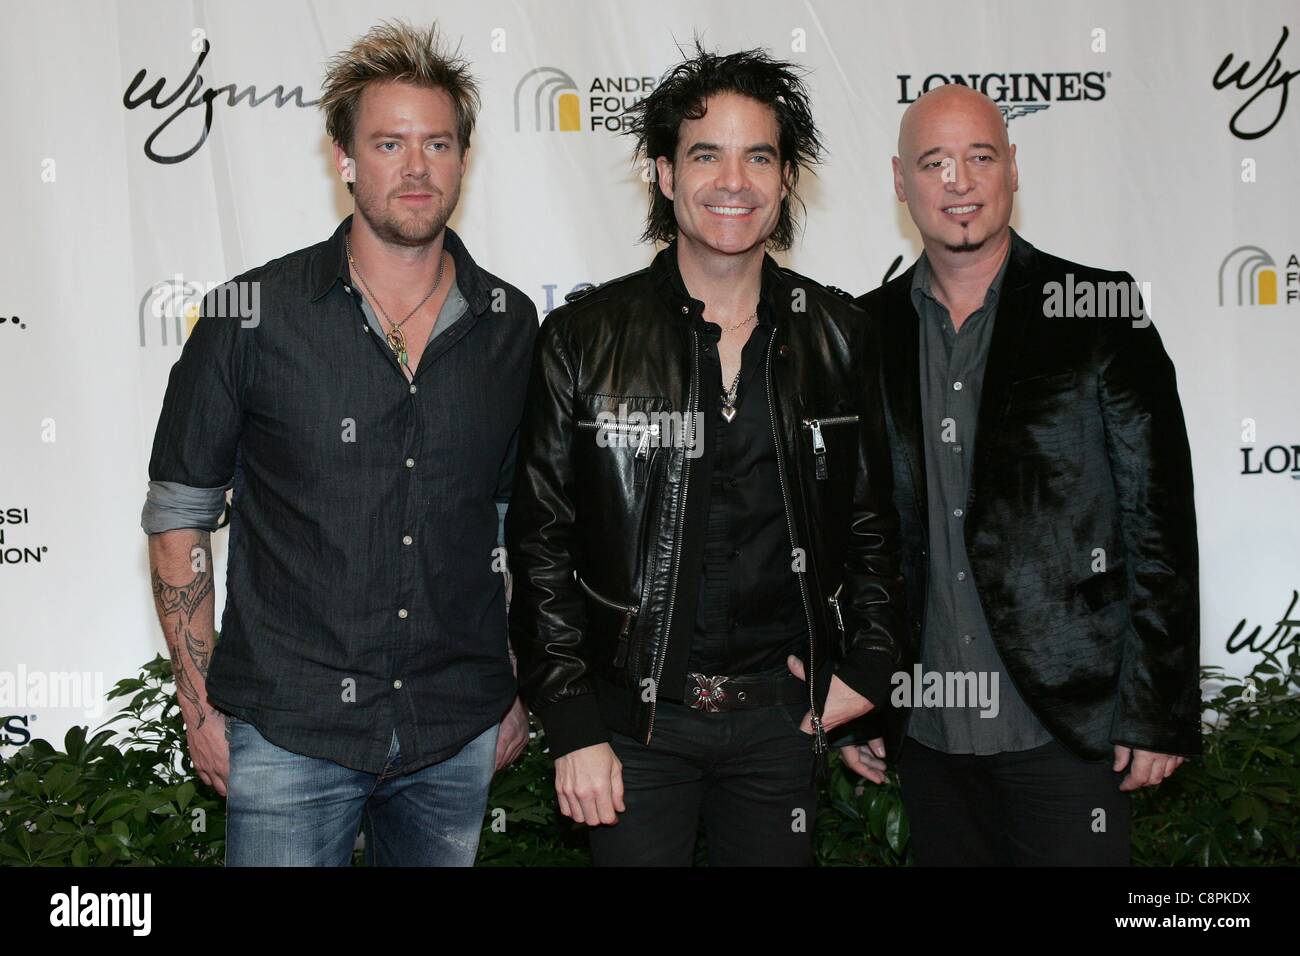 Scott Underwood, Patrick Monahan, Jimmy Stafford of Train at arrivals for 16th Andre Agassi Grand Slam for Children Benefit Concert, Wynn Las Vegas, Las Vegas, NV October 29, 2011. Photo By: James Atoa/Everett Collection Stock Photo